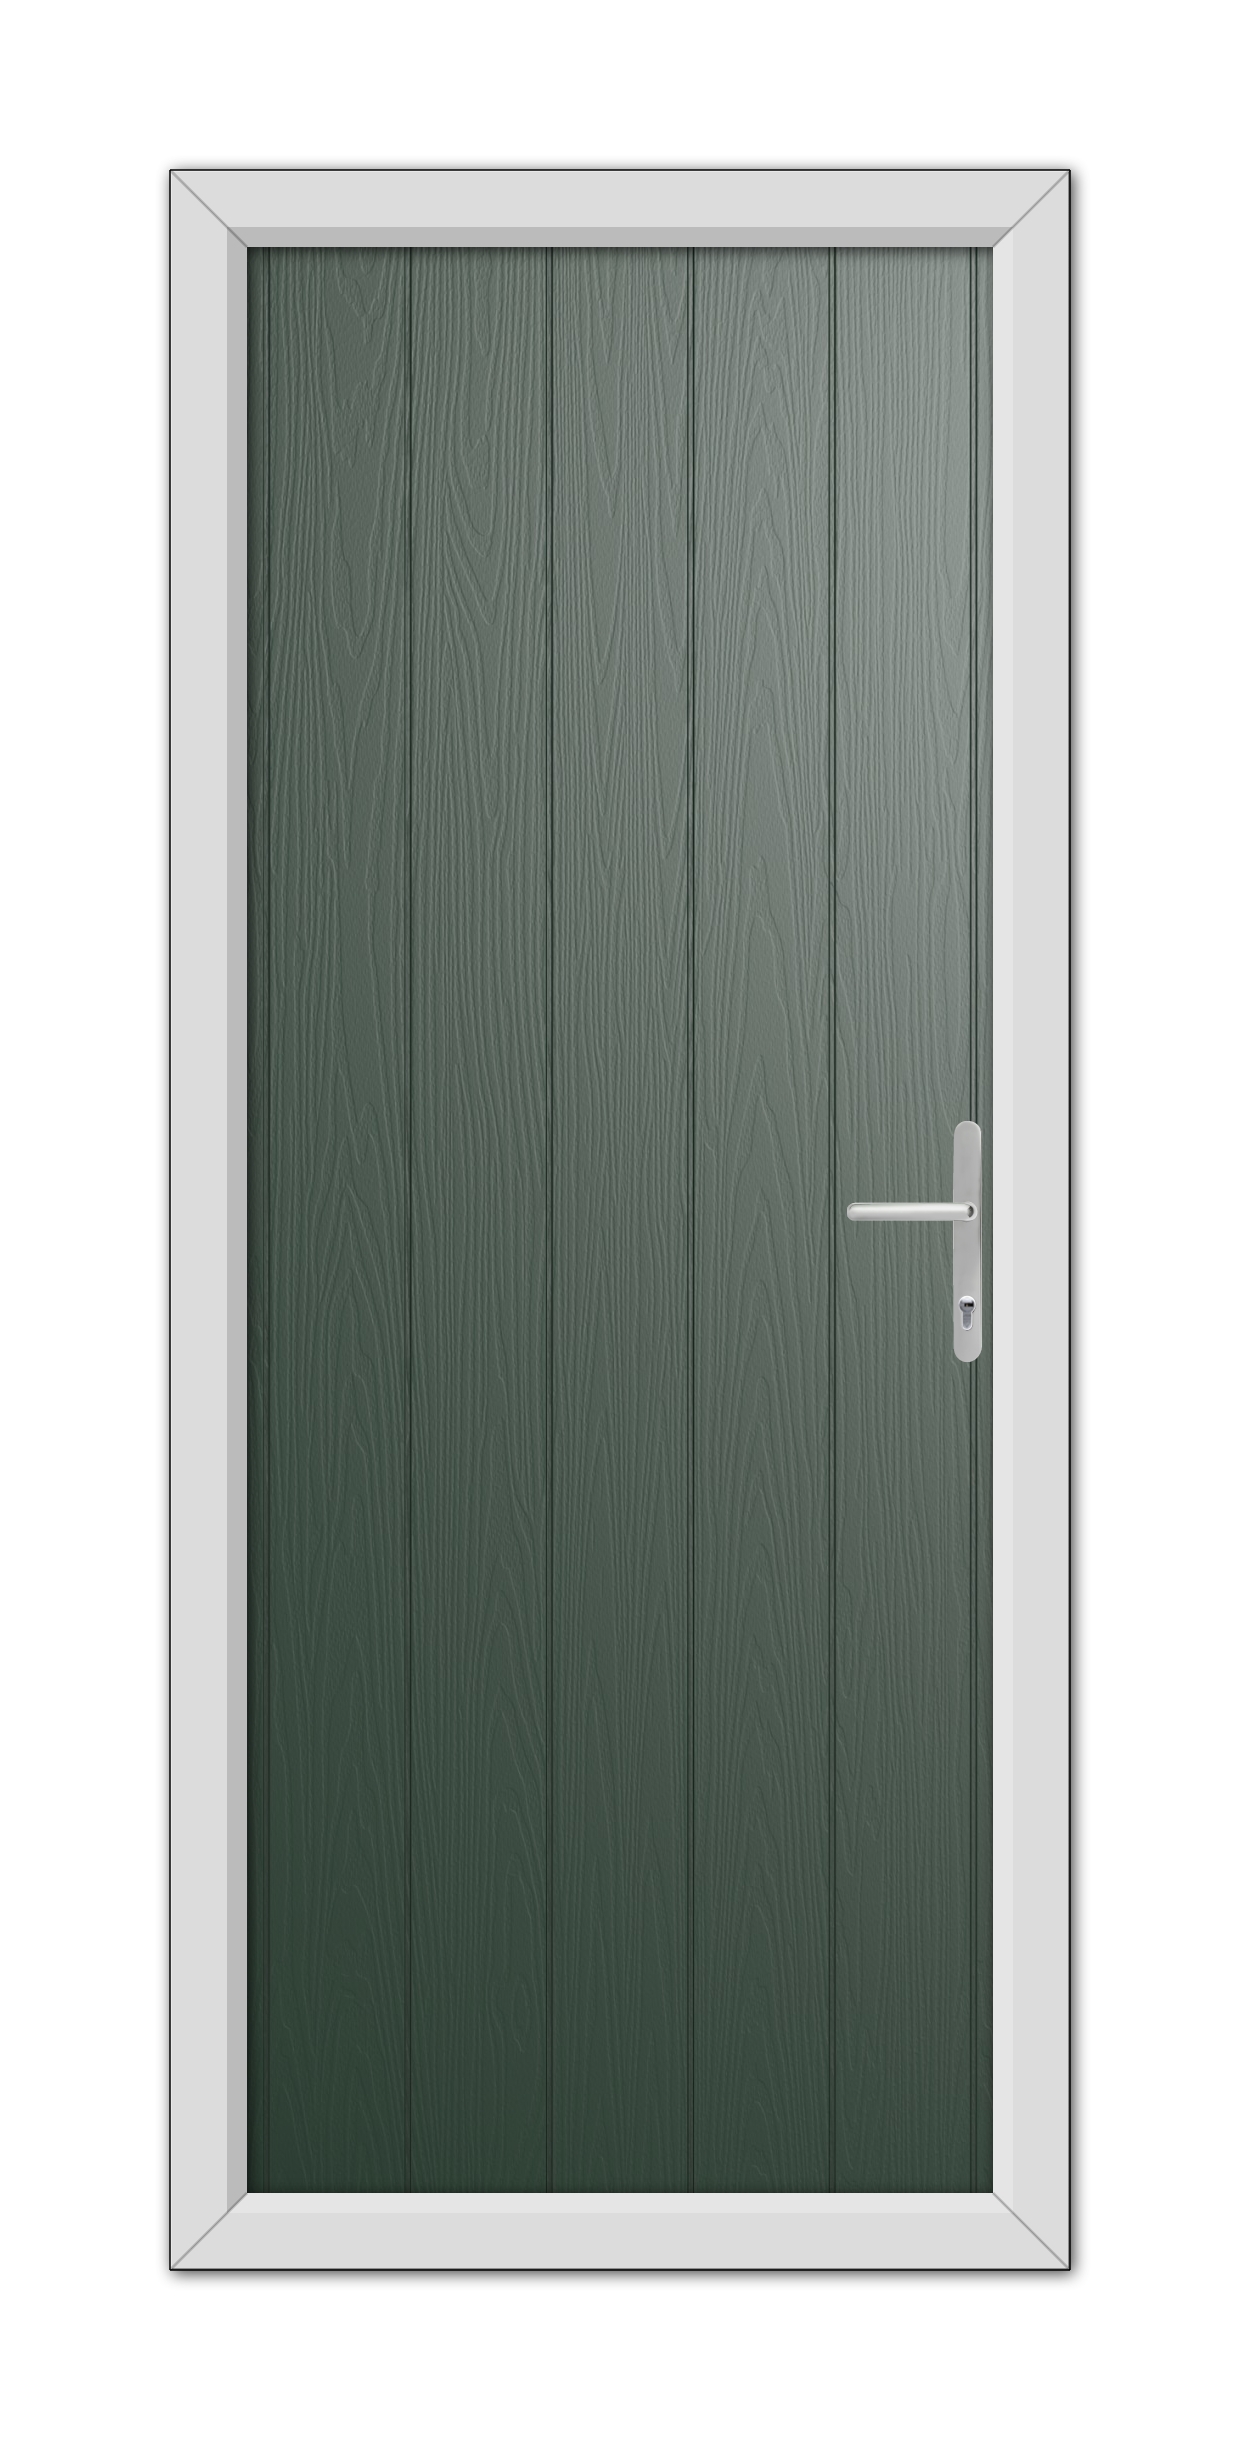 A Green Gloucester Composite Door 48mm Timber Core with a modern white handle, set within a white door frame against a white background.